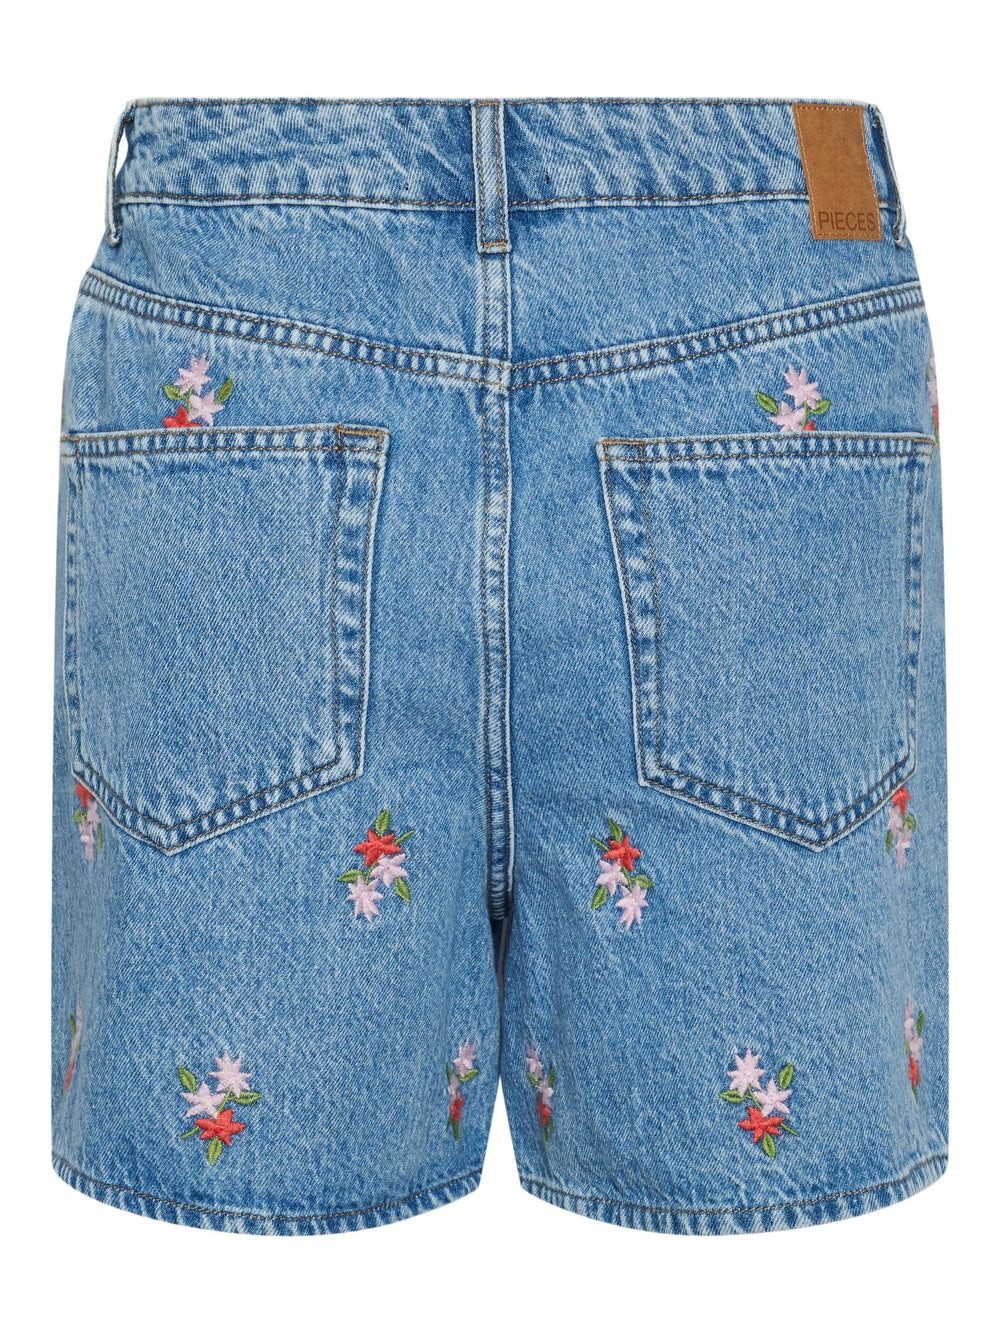 Pieces - Pcsky Embroidery Shorts - 4467446 Light Blue Denim Embroidery Shorts 